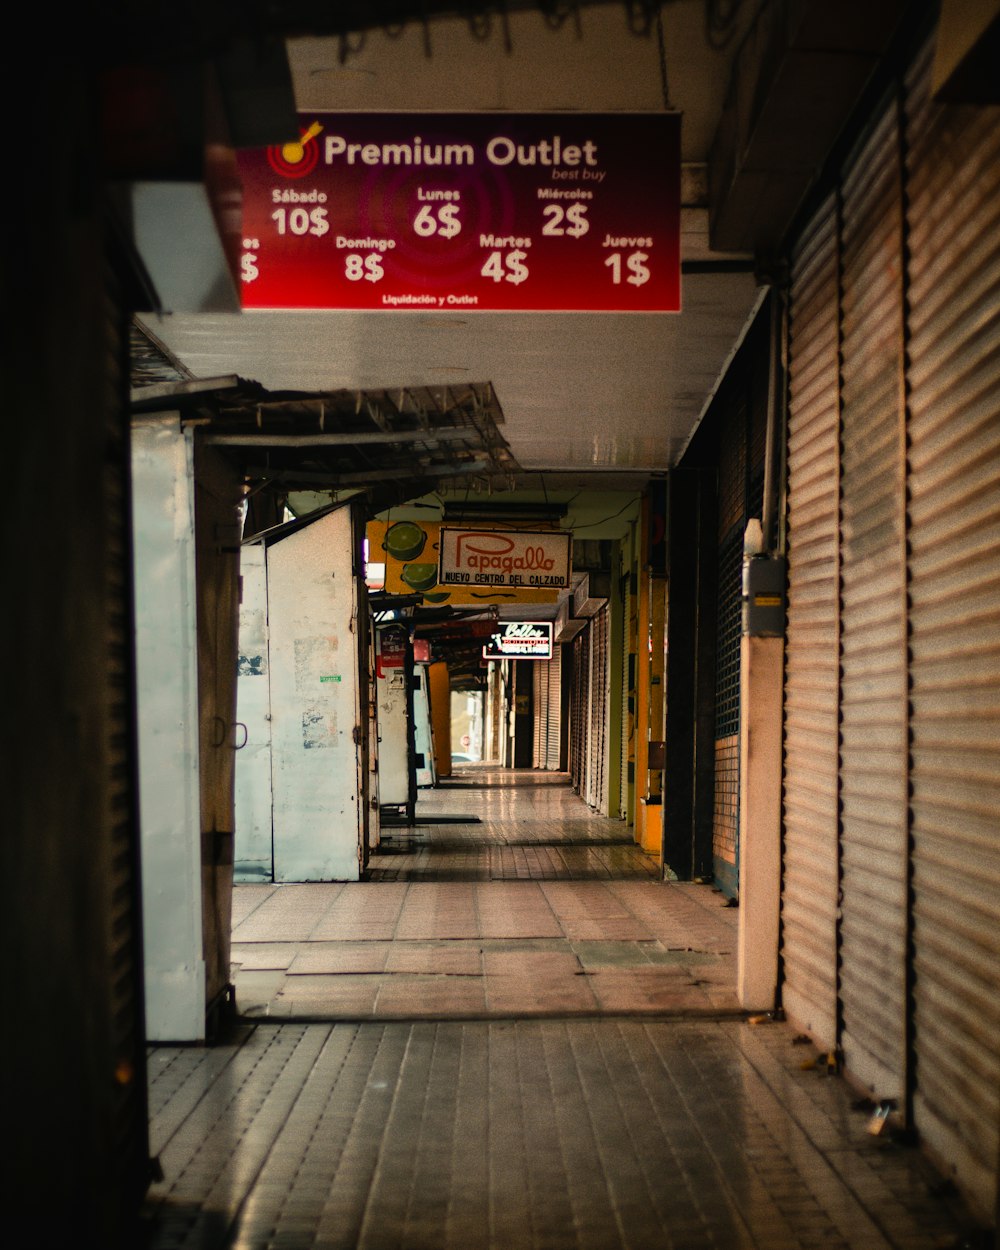 a long hallway with a sign that says premium outlet